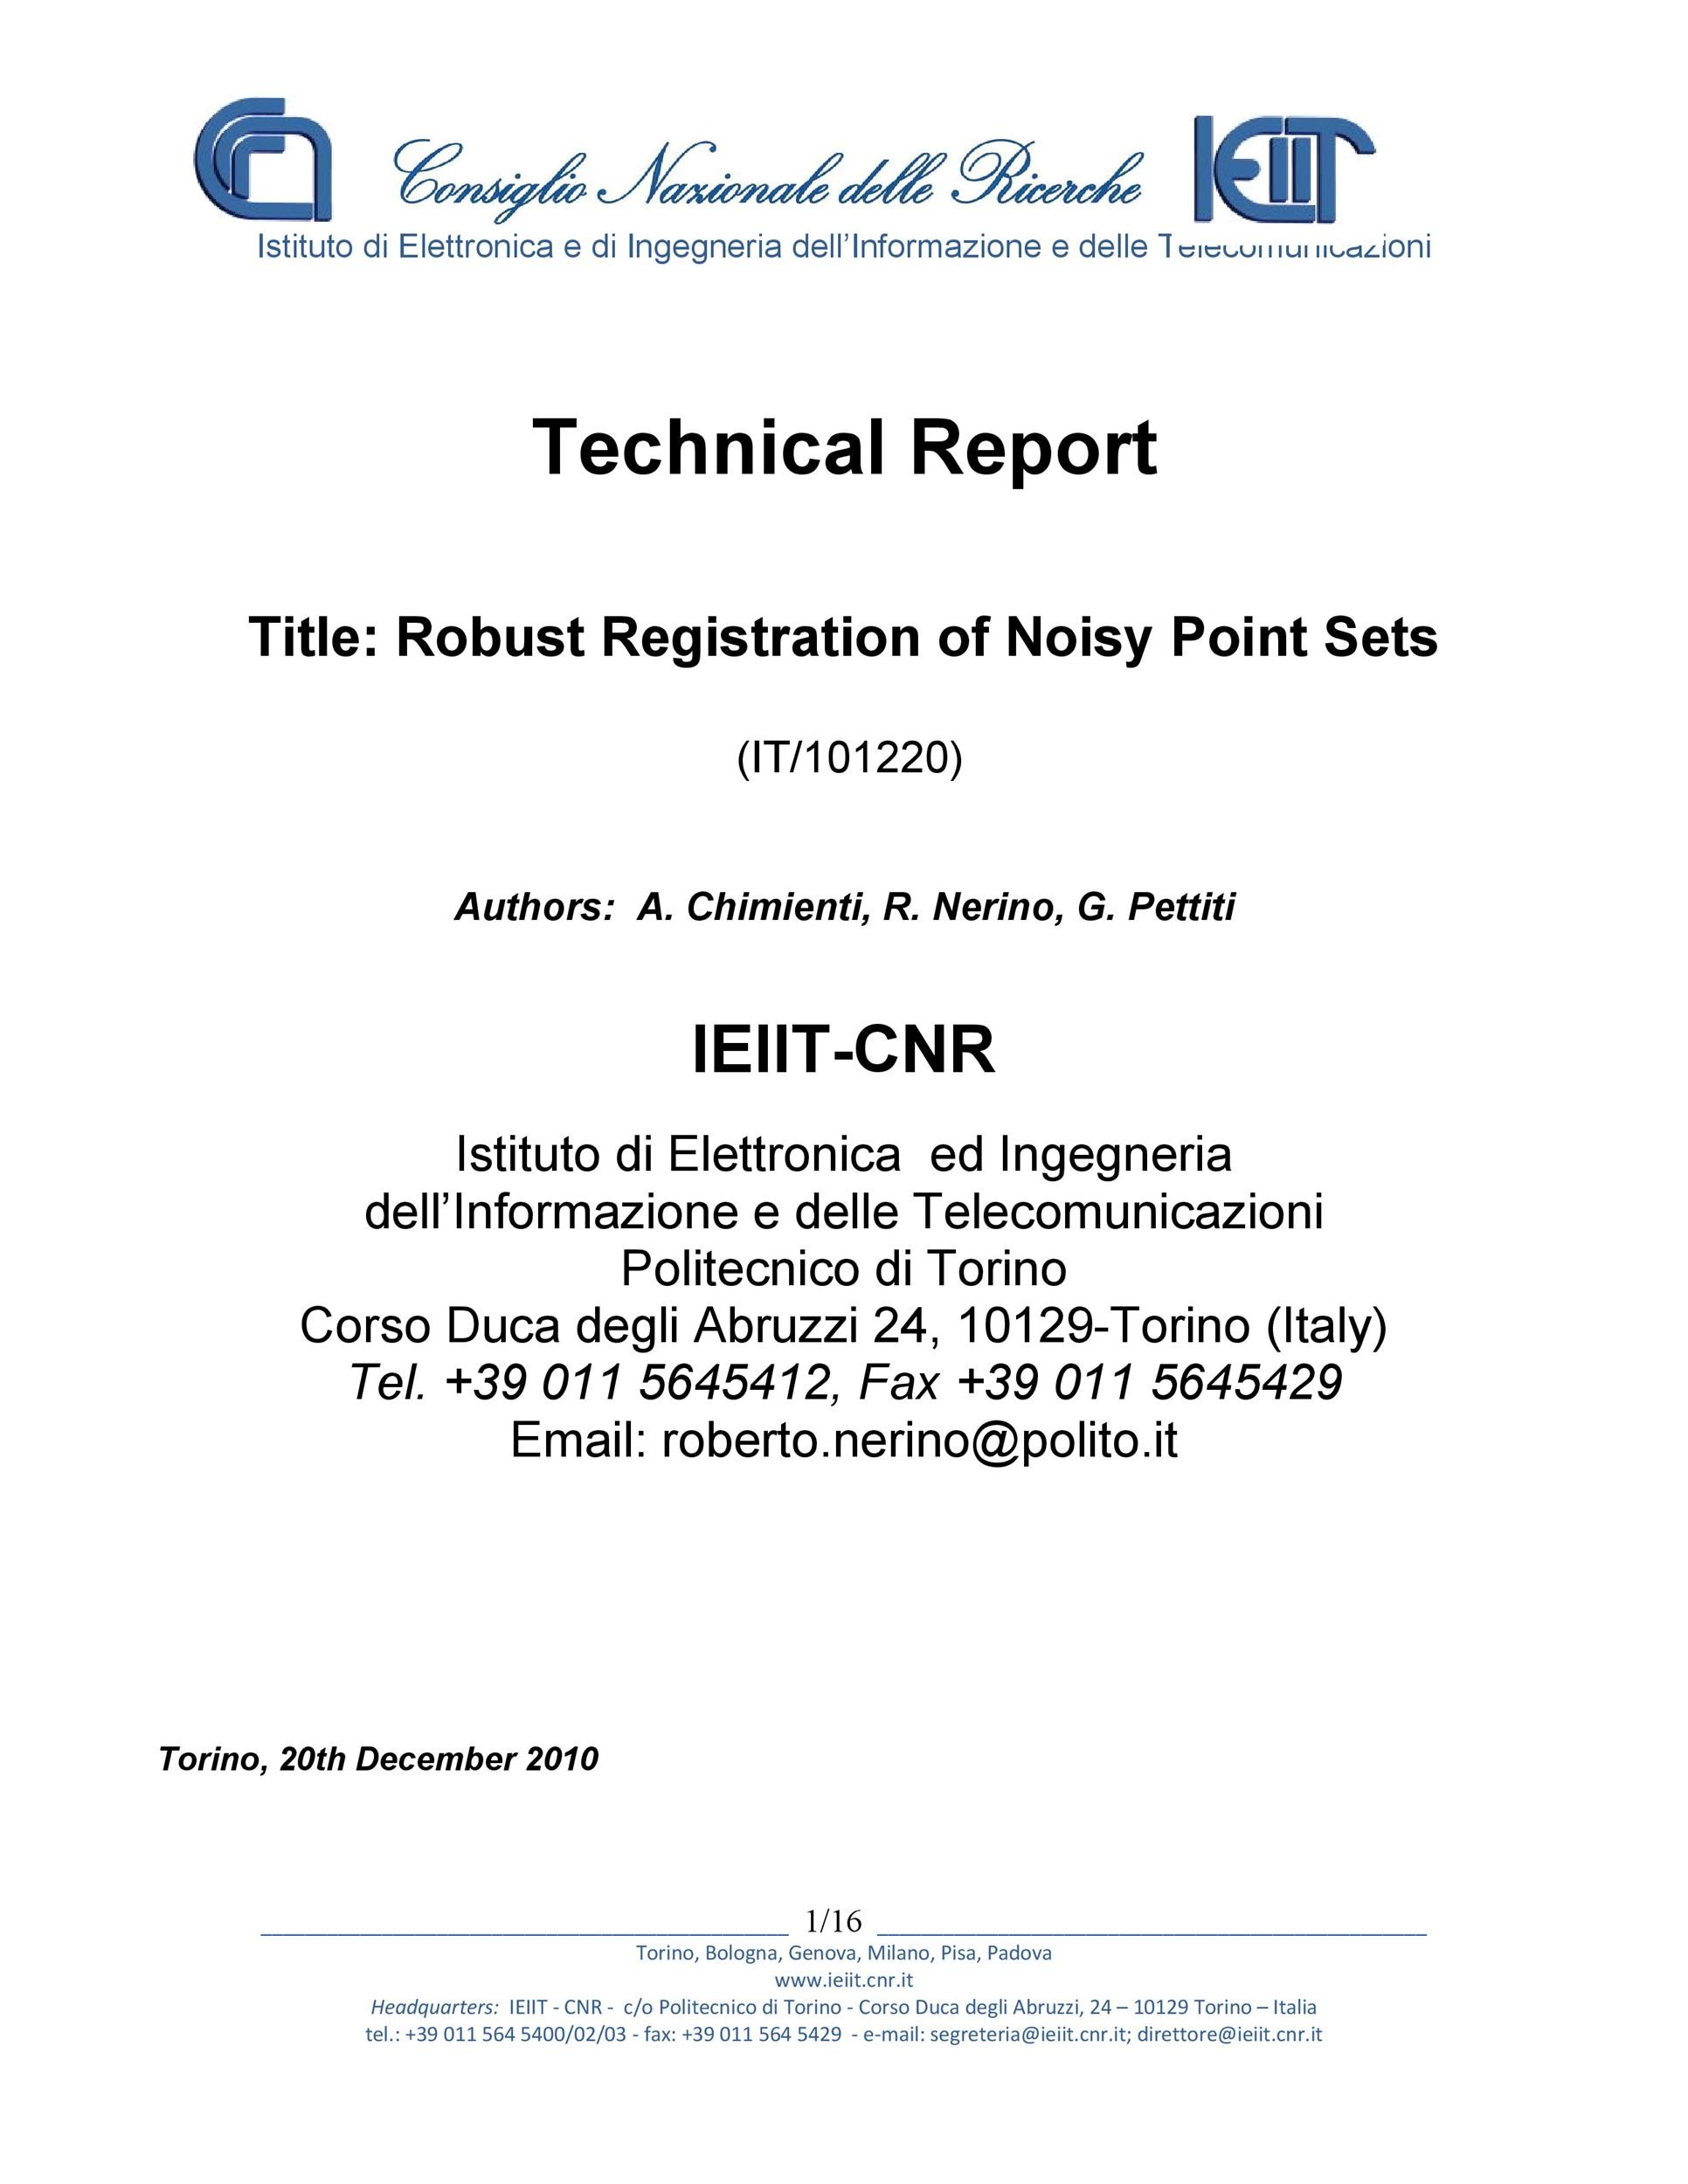 Free technical report template 39